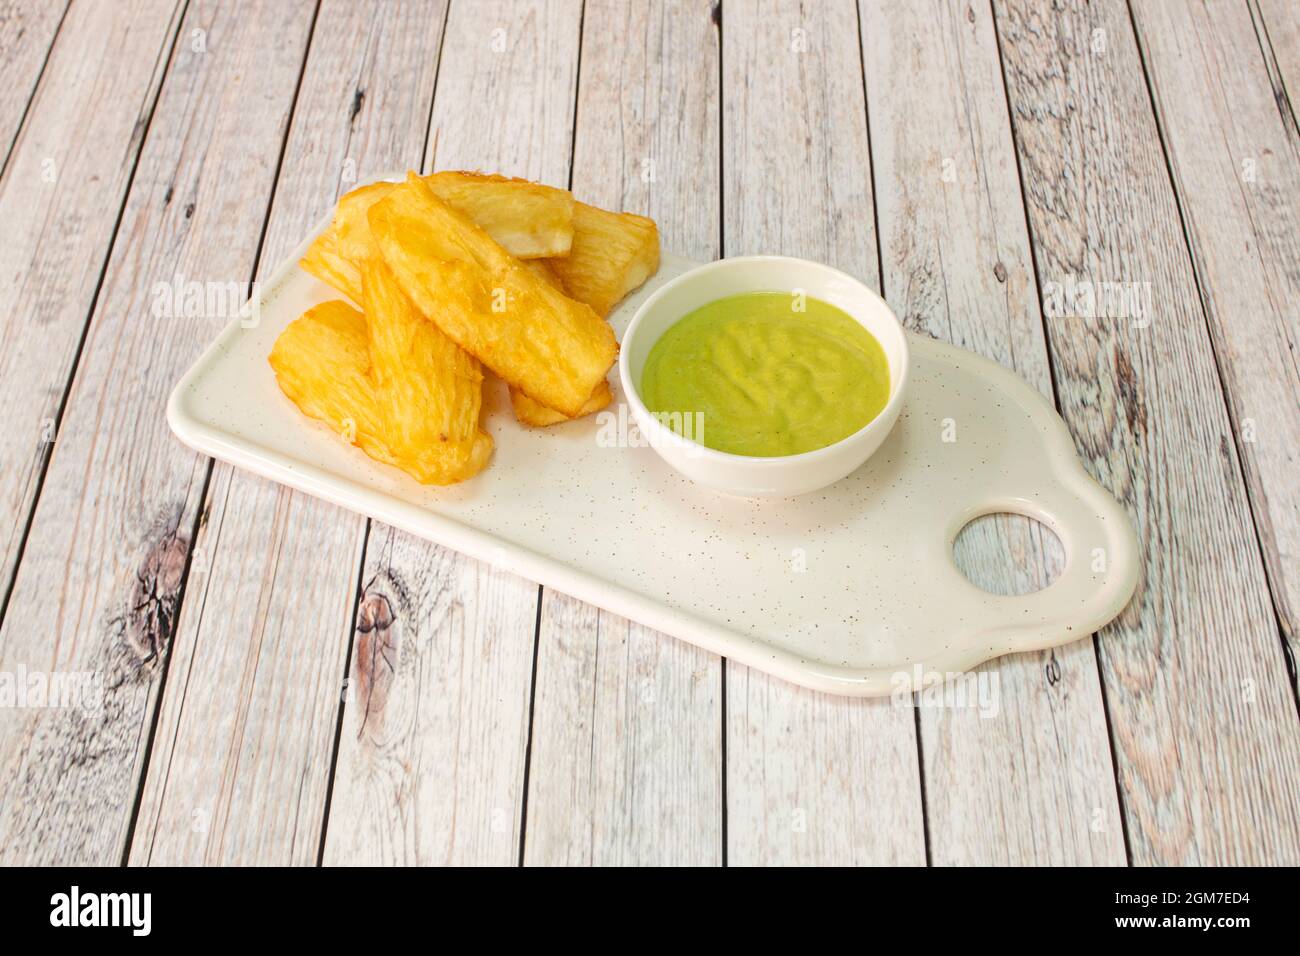 Tray of delicious fried yucca with green sauce to dip in a small white bowl Stock Photo